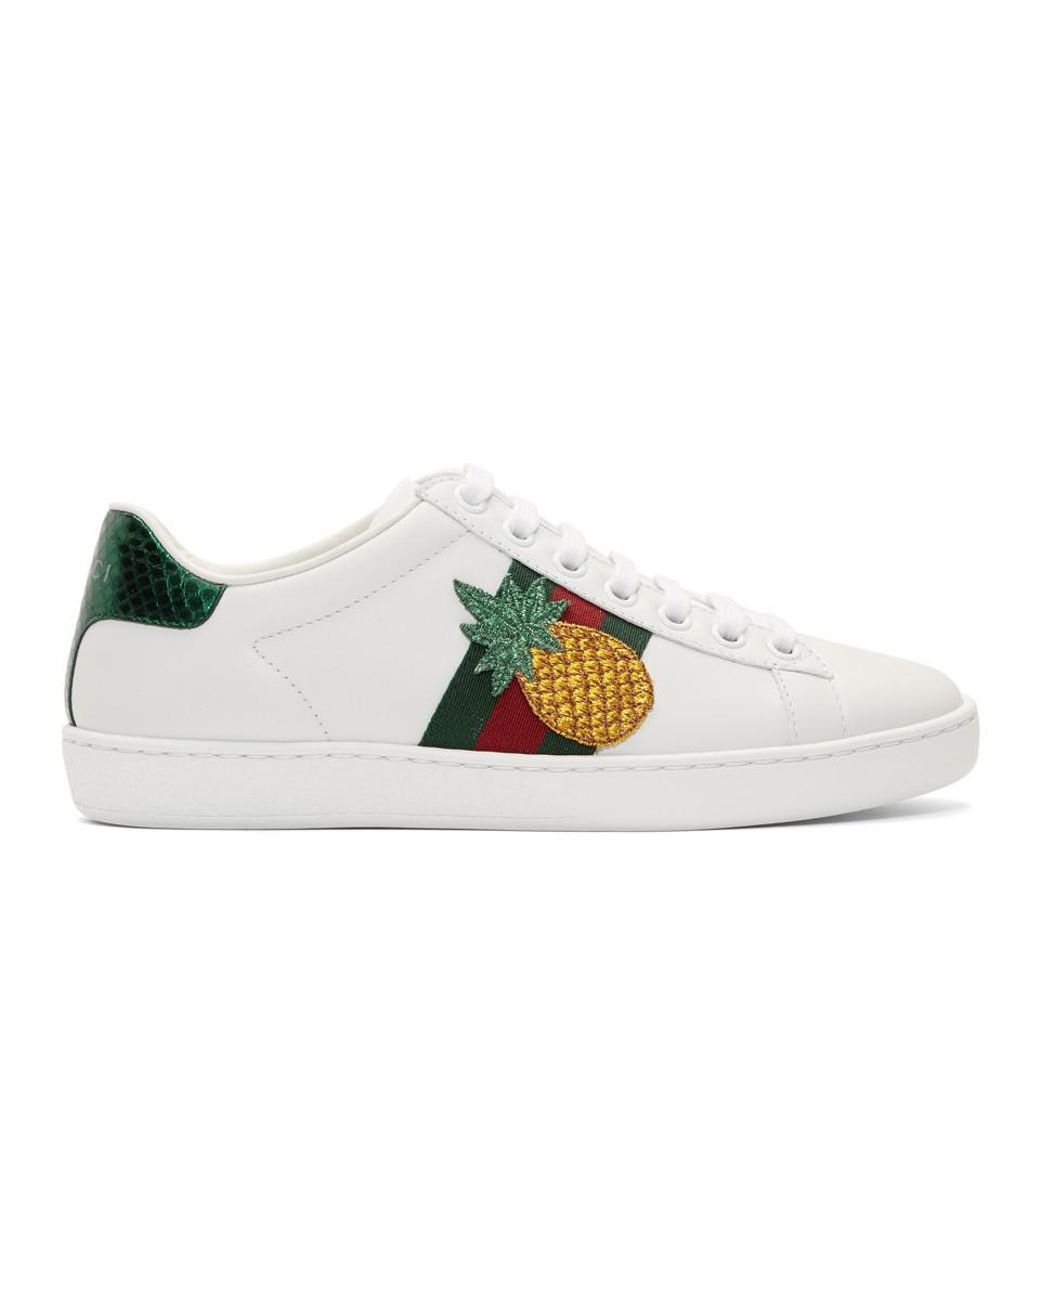 Gucci Pineapple & Ladybug Ace Sneakers in White | Lyst